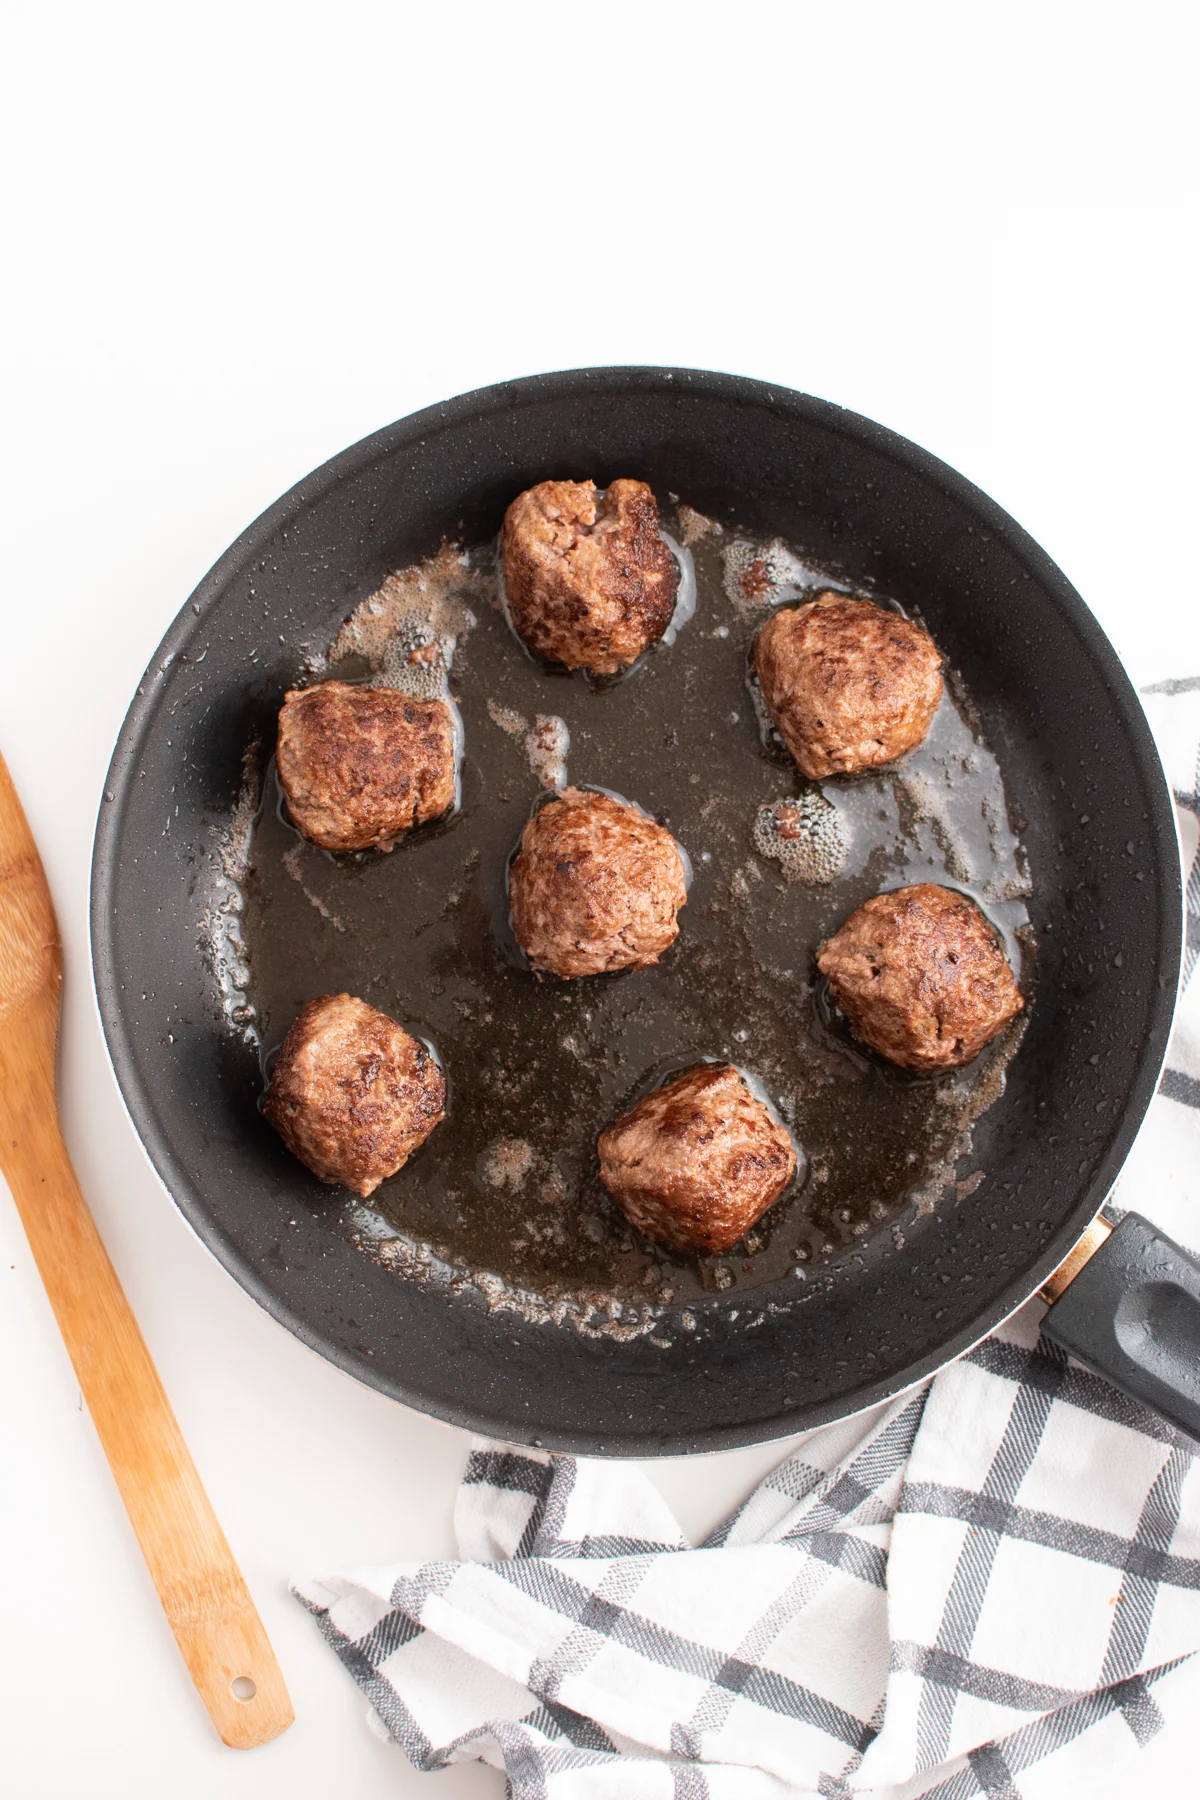 Authentic homemade meatballs for spaghetti in a frying pan on white table.